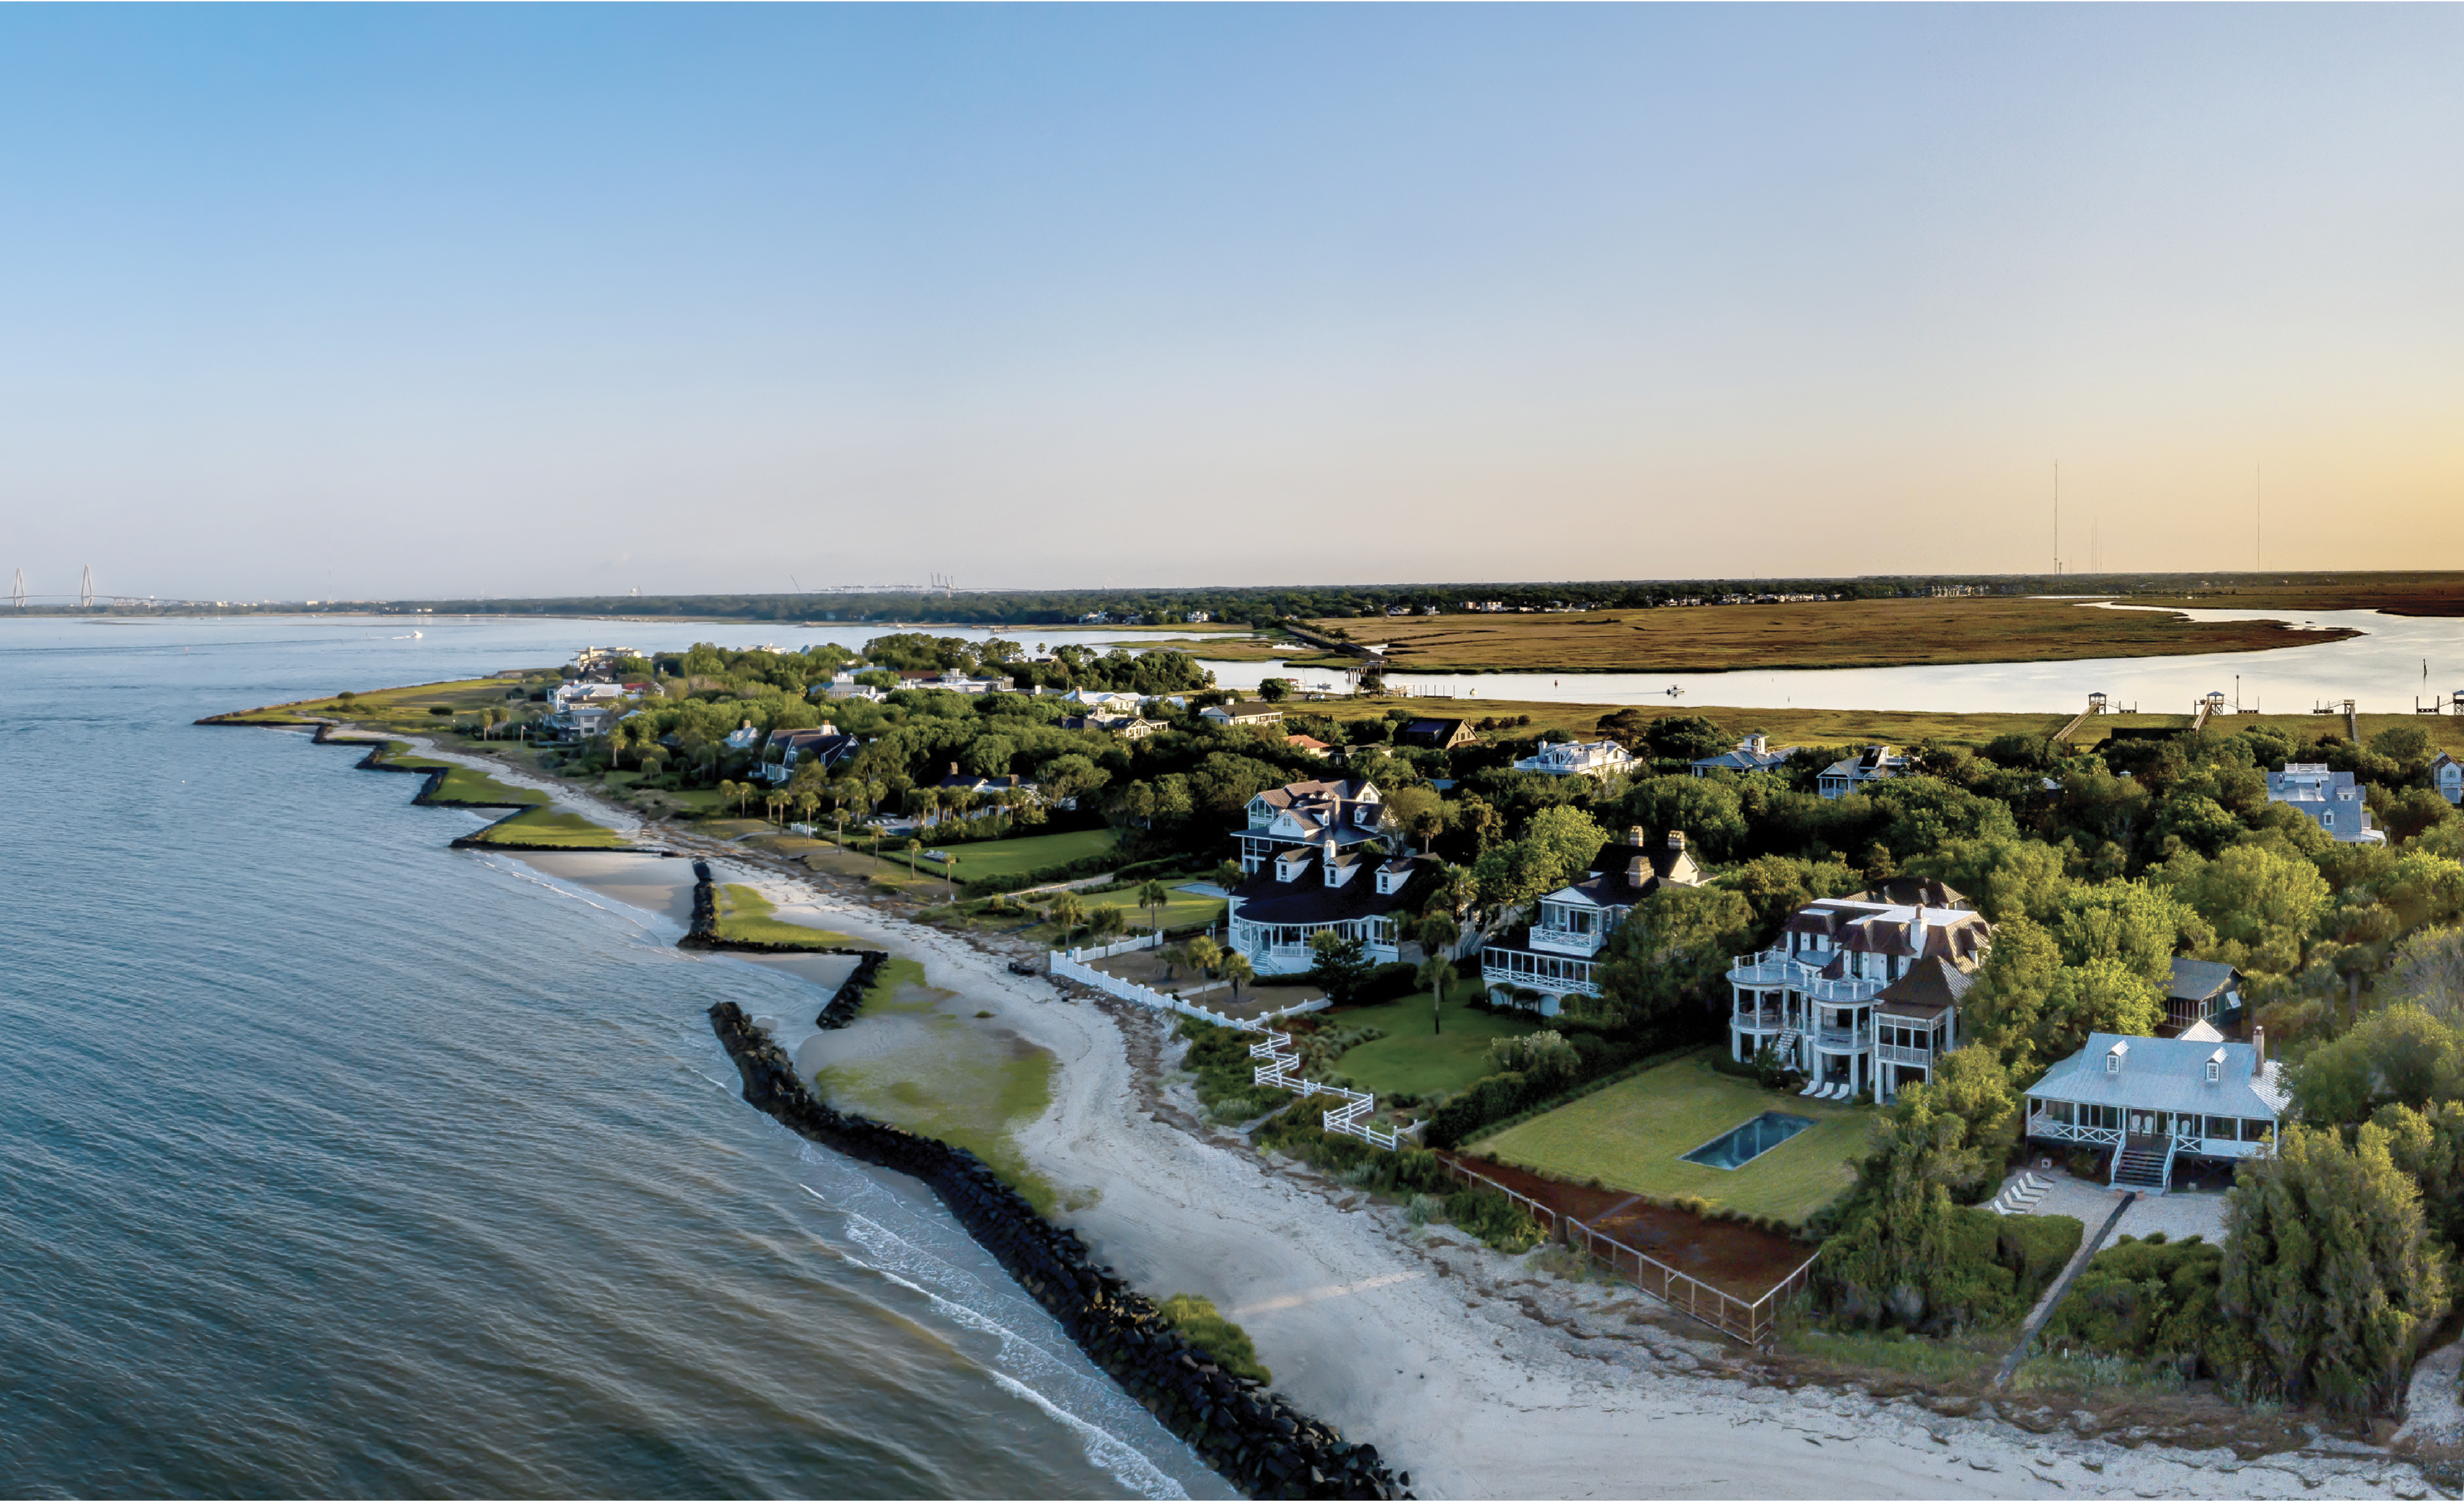 The southern tip of Sullivan’s near Fort Moultrie curves to the Intracoastal Waterway, with Mount Pleasant’s Old Village on the far side. There, a trolley bridge across Cove Inlet once connected summer residents to the island.